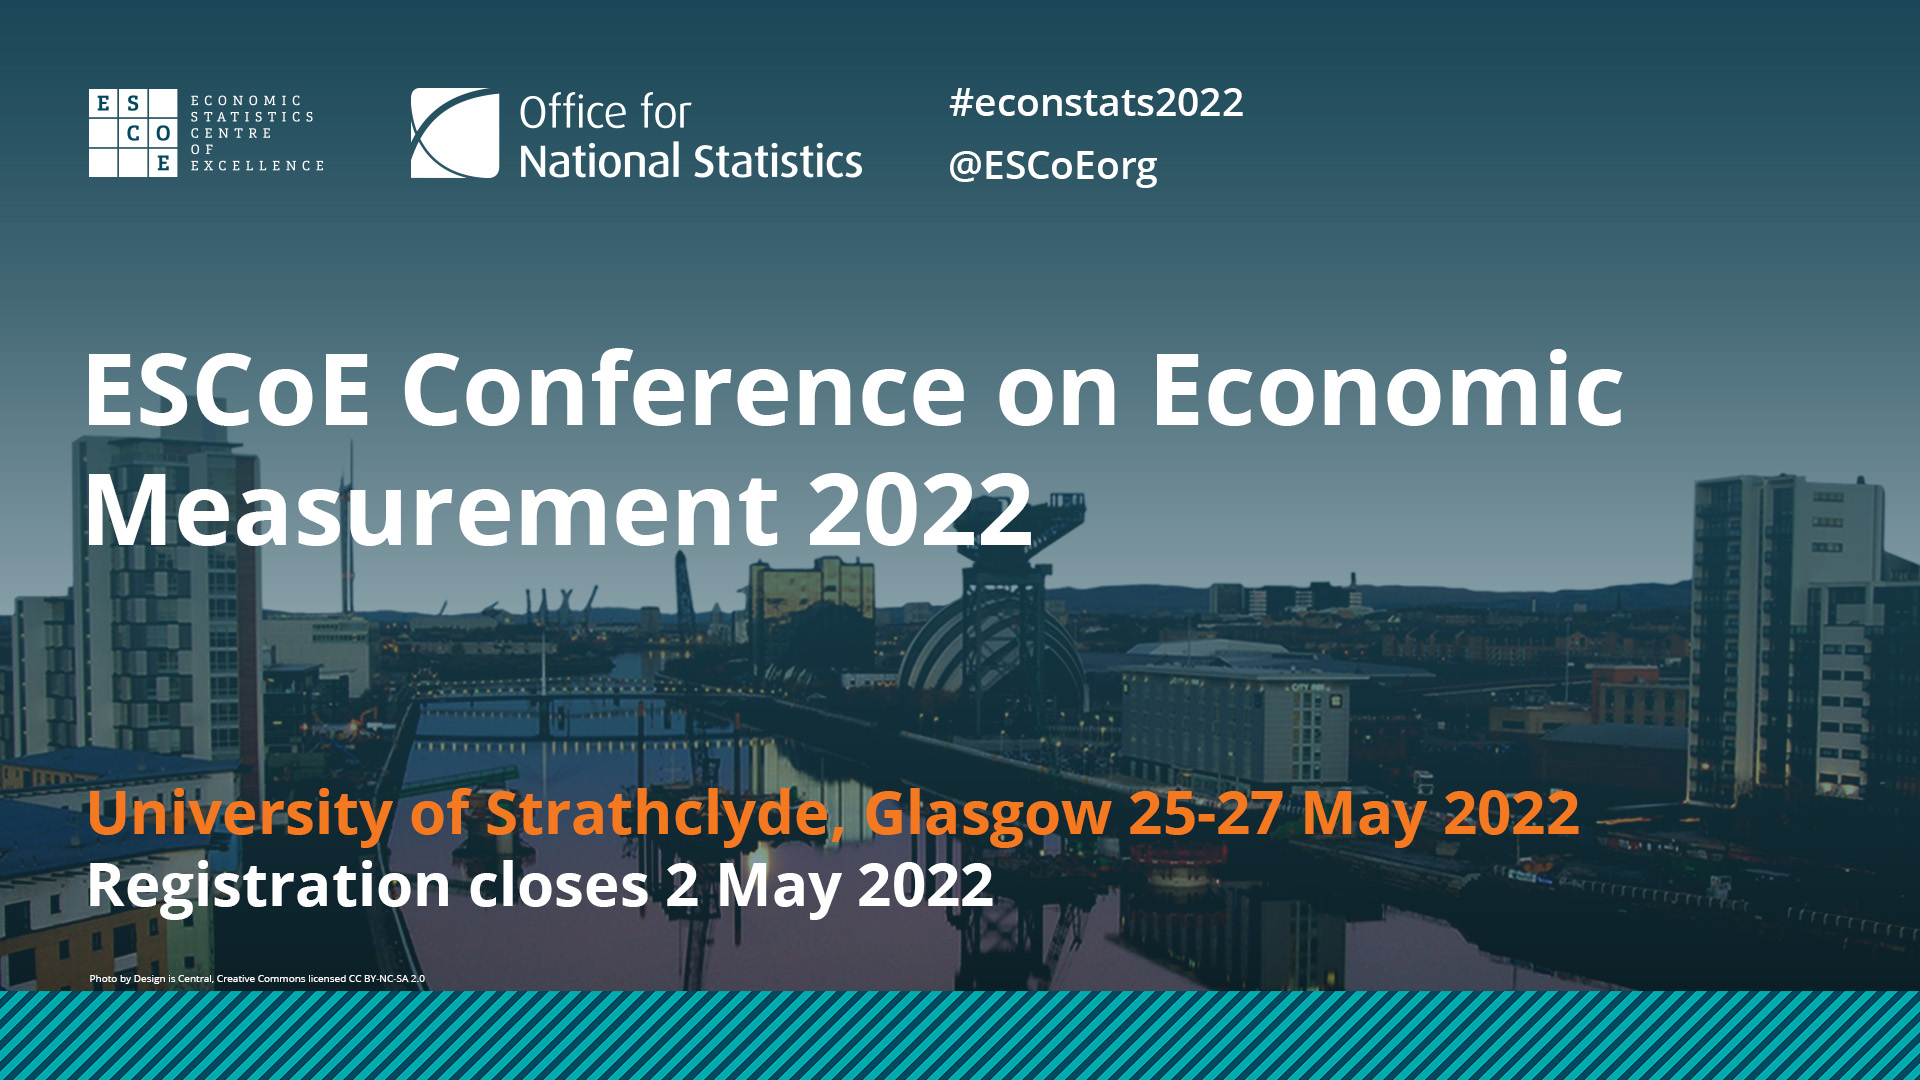 Dr Tho Pham presents at ESCoE Conference on Economic Measurement 2022